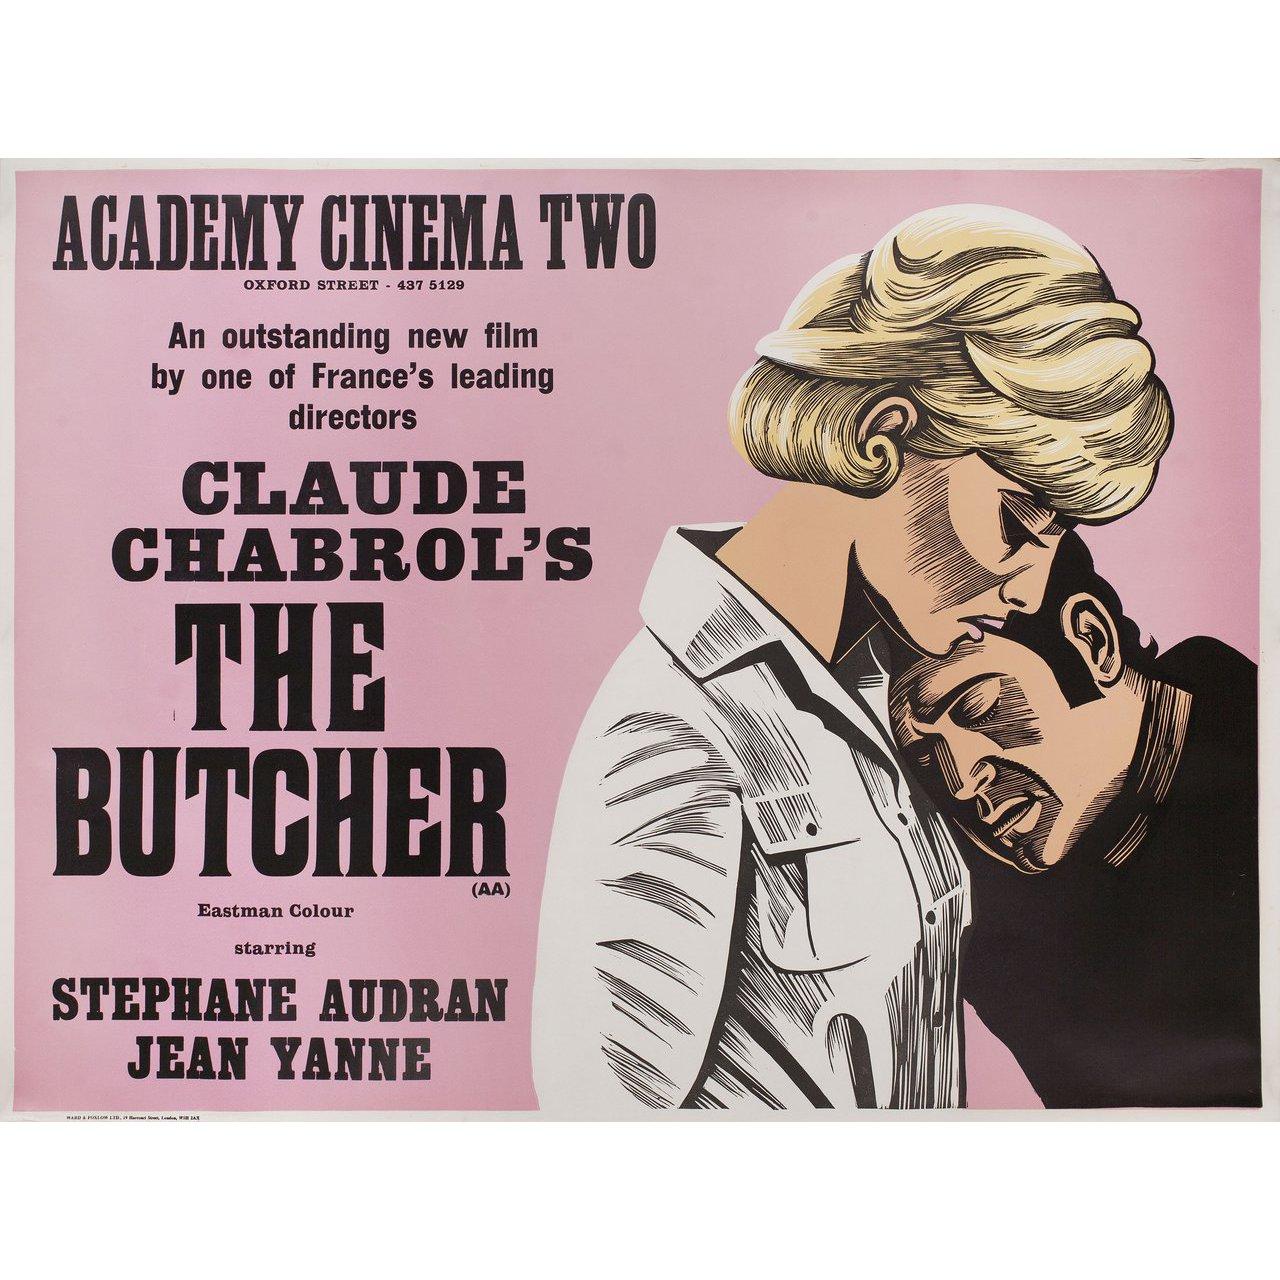 Original 1970 British quad poster by Peter Strausfeld for the film Le Boucher (The Butcher) directed by Claude Chabrol with Stephane Audran / Jean Yanne / Antonio Passalia / Pascal Ferone. Very Good-Fine condition, rolled. Please note: the size is